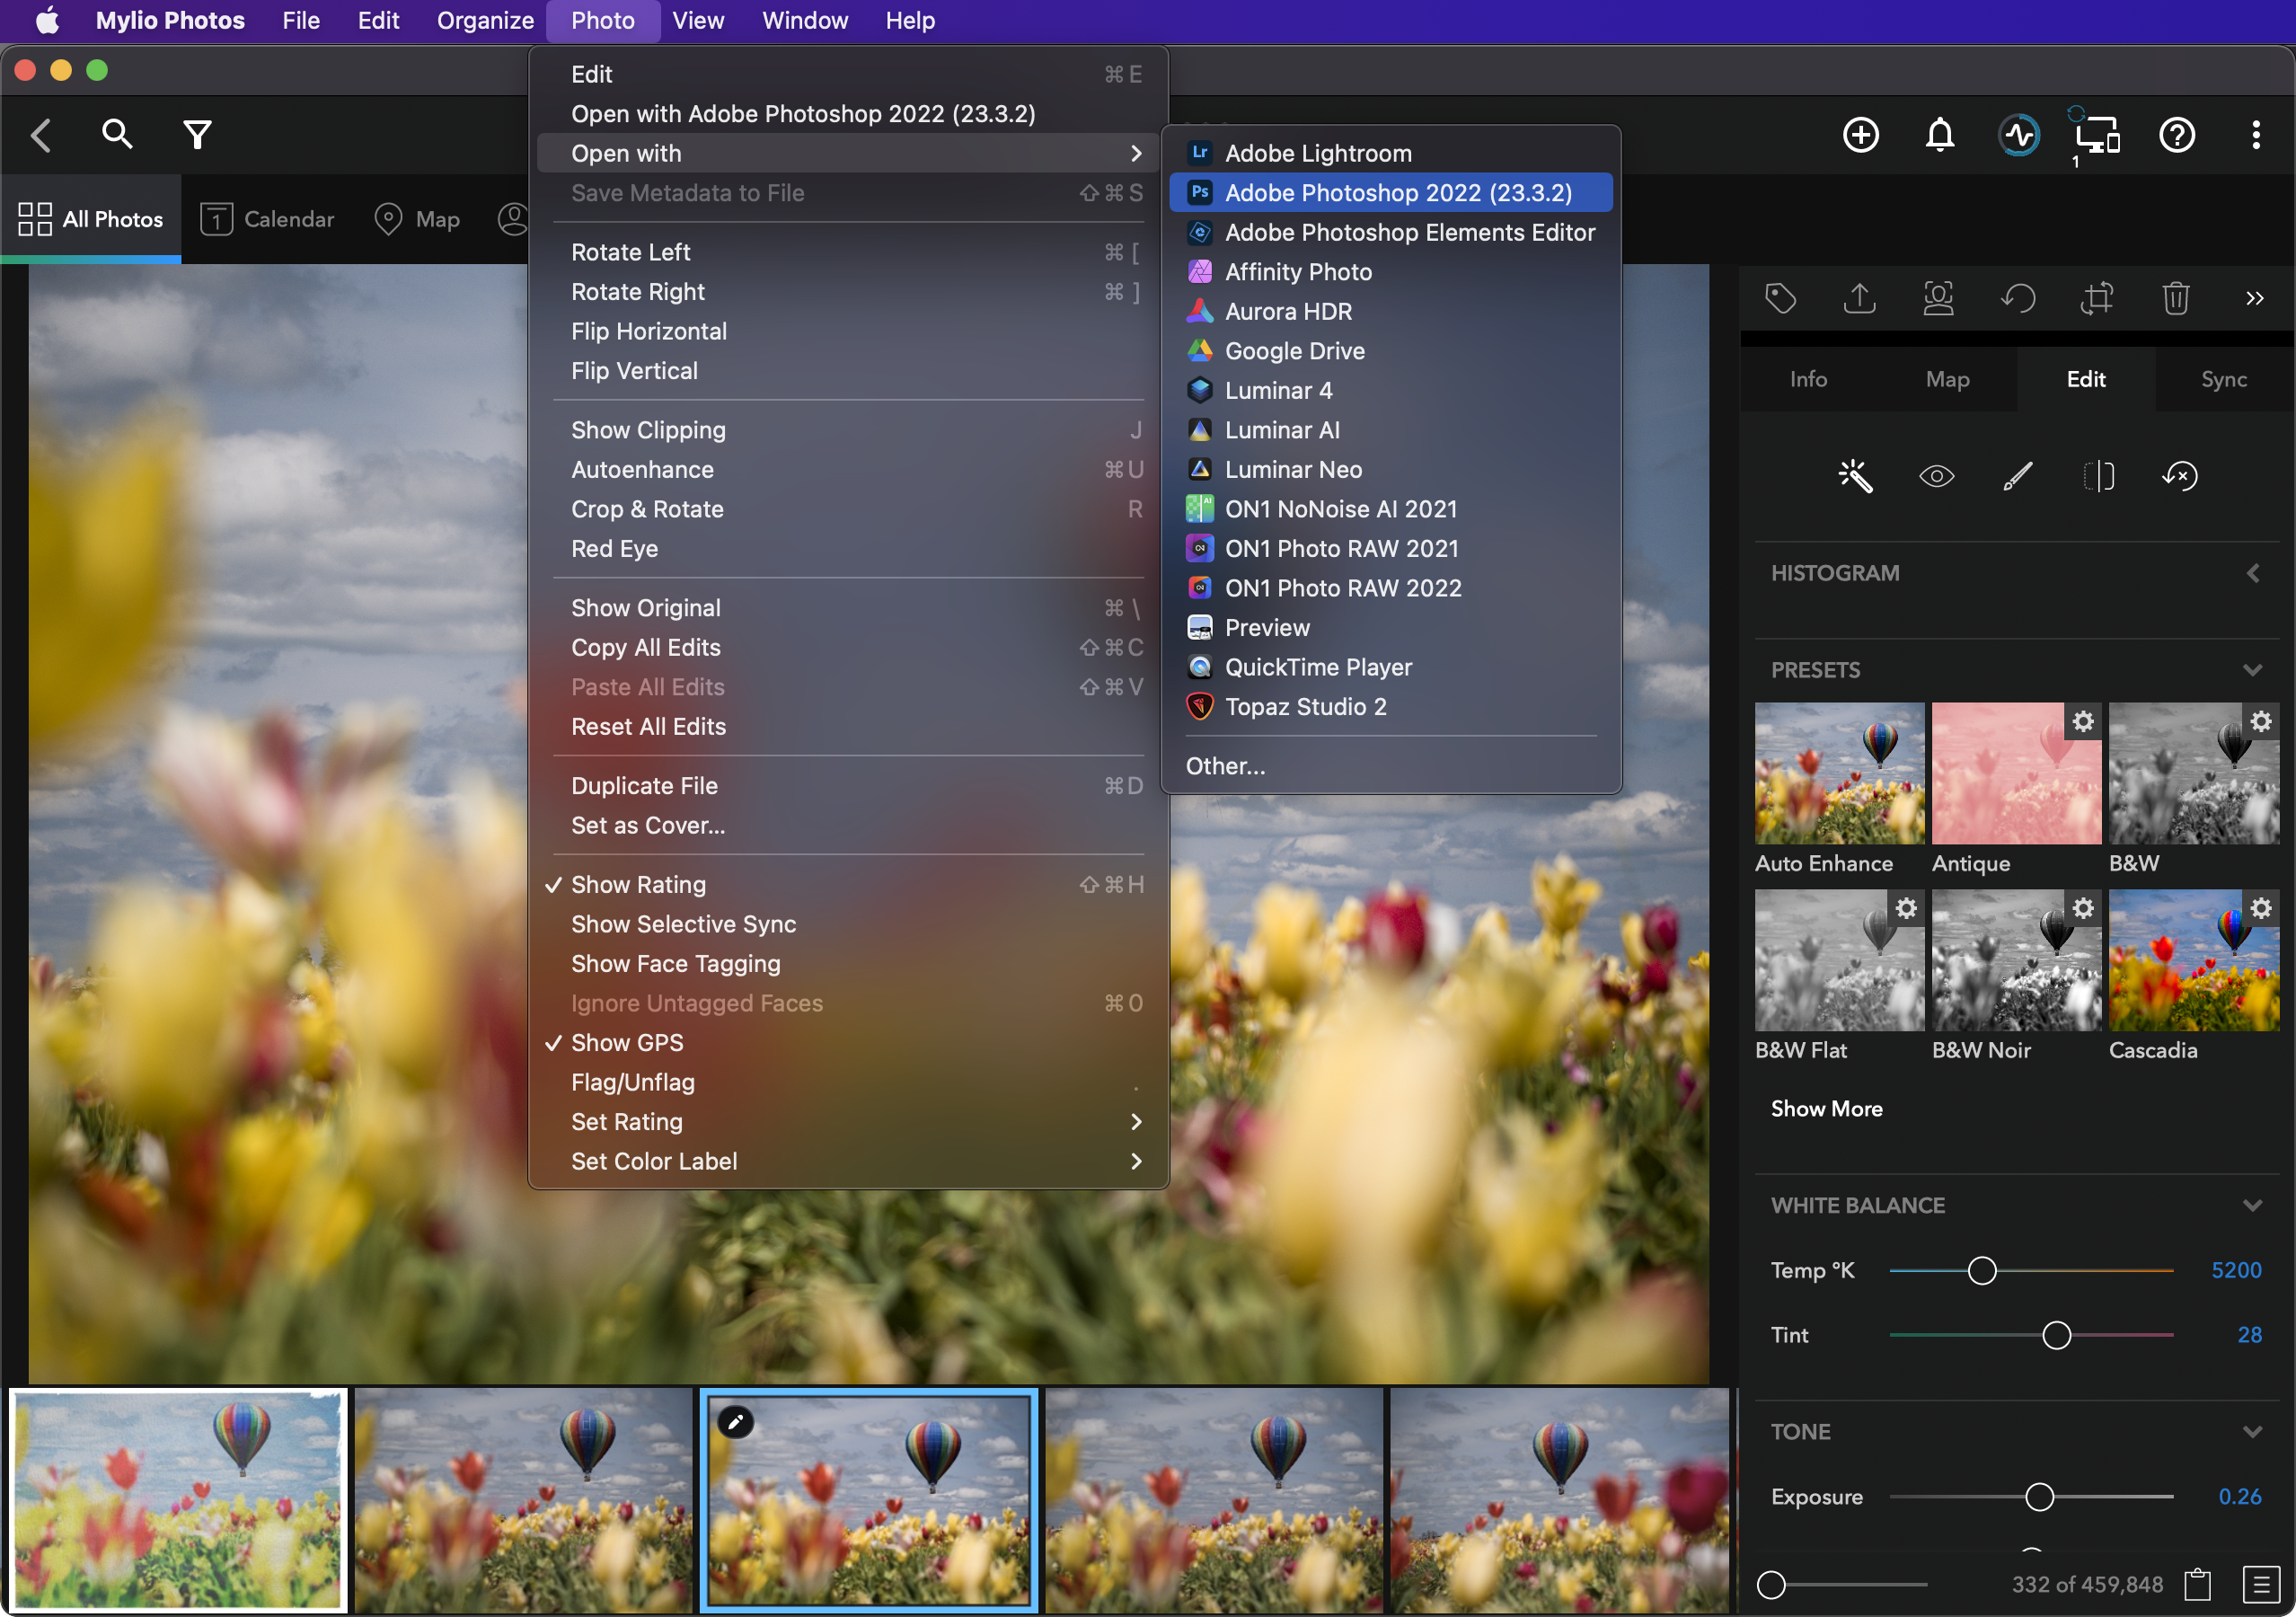 Mylio Photos can export images to external applications for further editing.